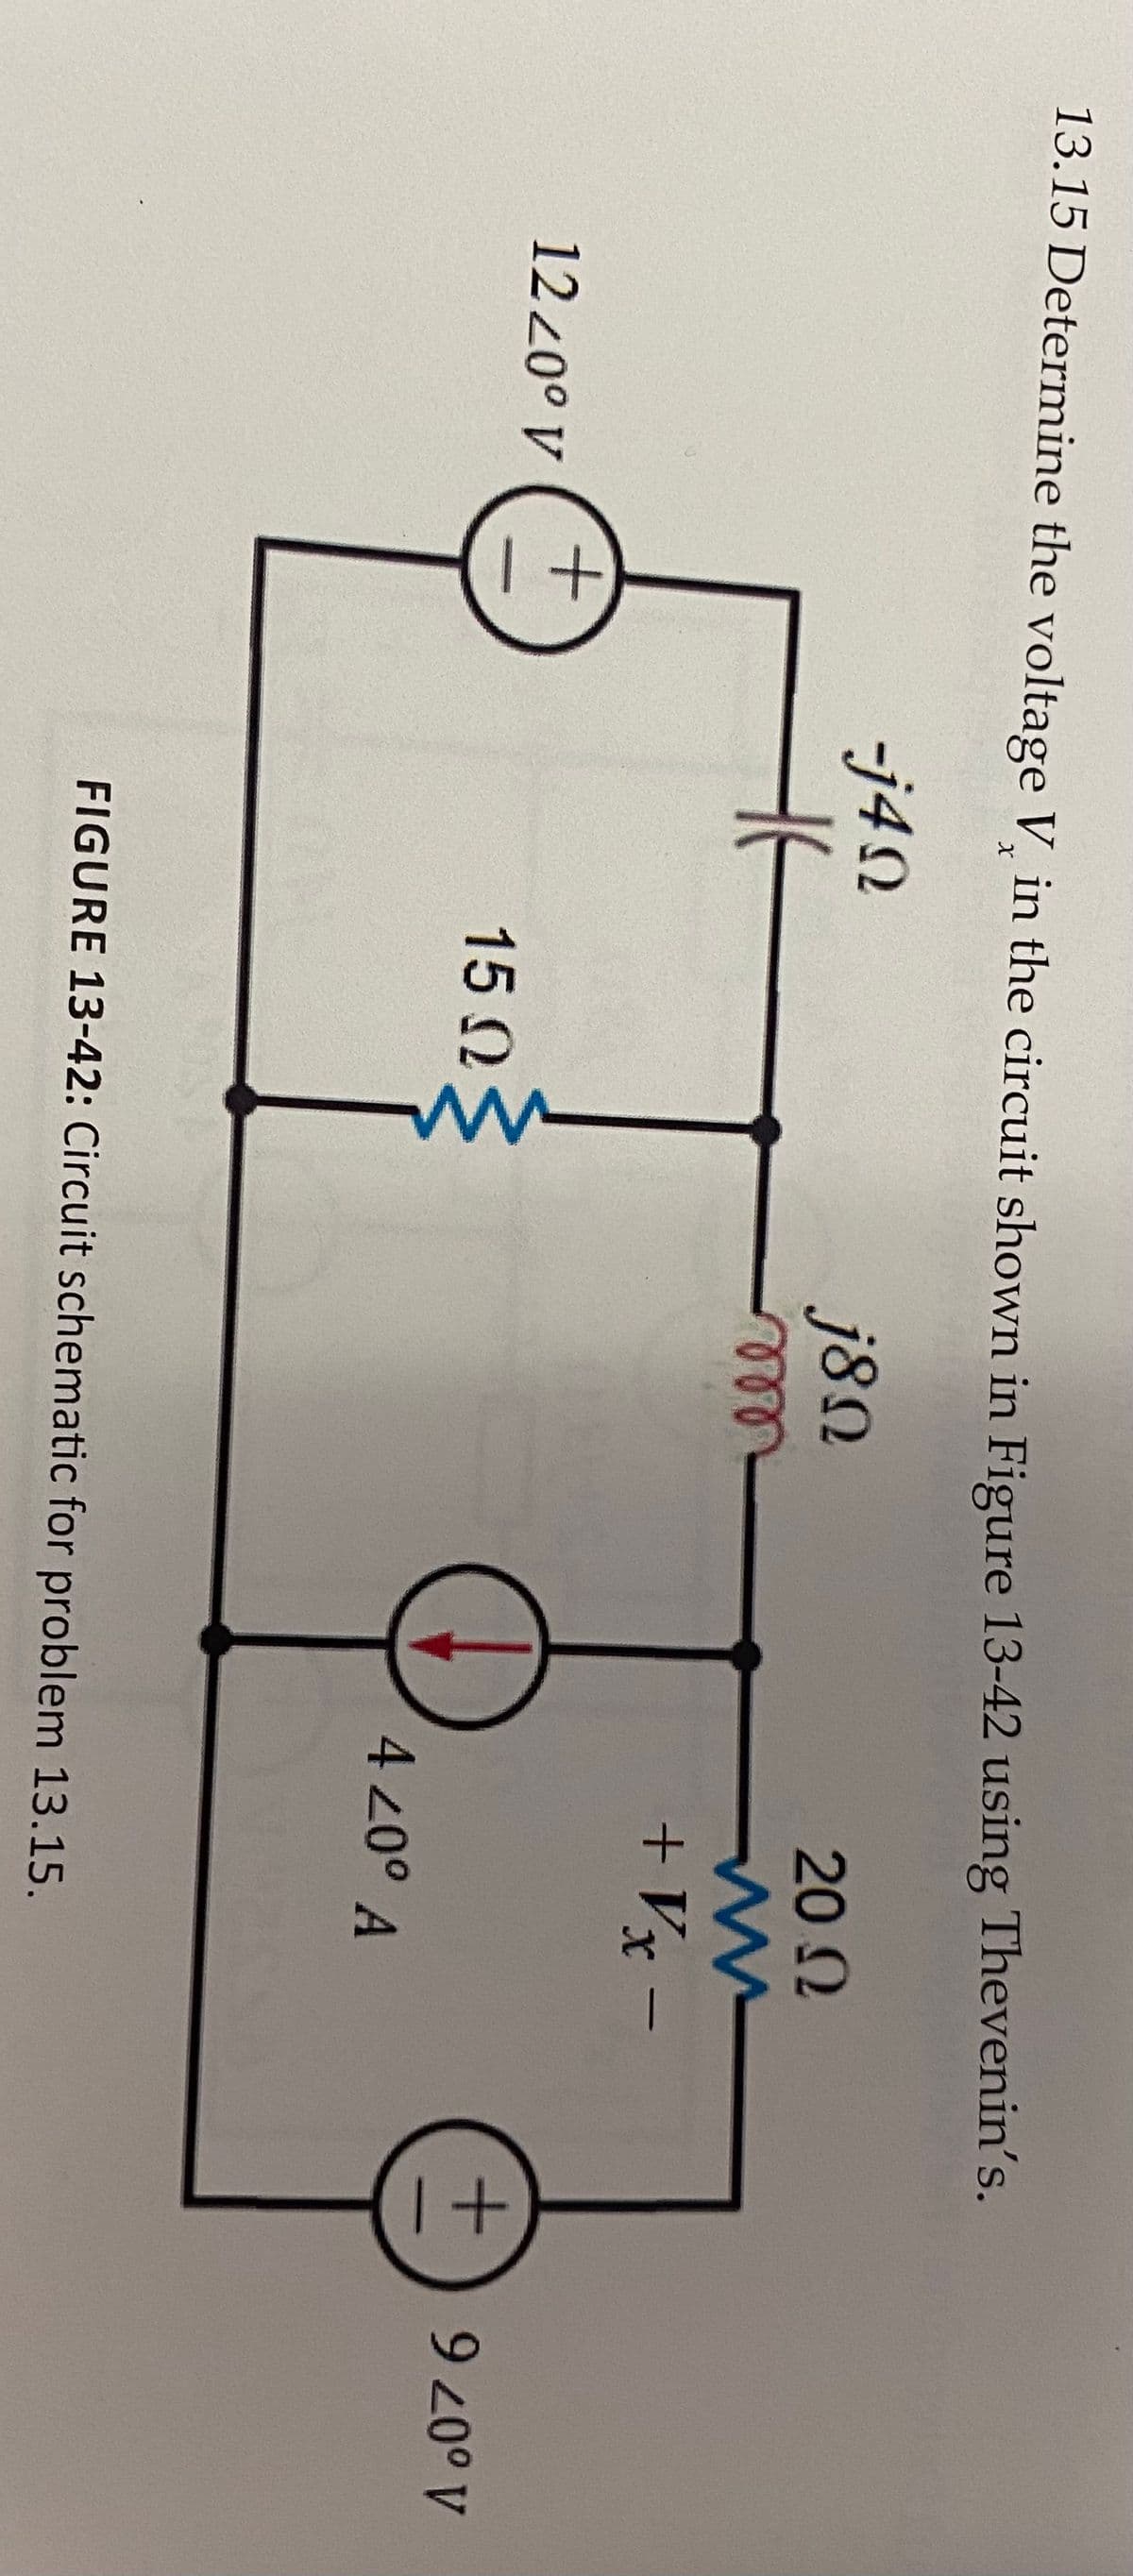 13.15 Determine the voltage V in the circuit shown in Figure 13-42 using Thevenin's.
-j4N
j8N
20 2
ell
+ Vx –
1220° V
15 N
4 20° A
A o07 6
FIGURE 13-42: Circuit schematic for problem 13.15.
